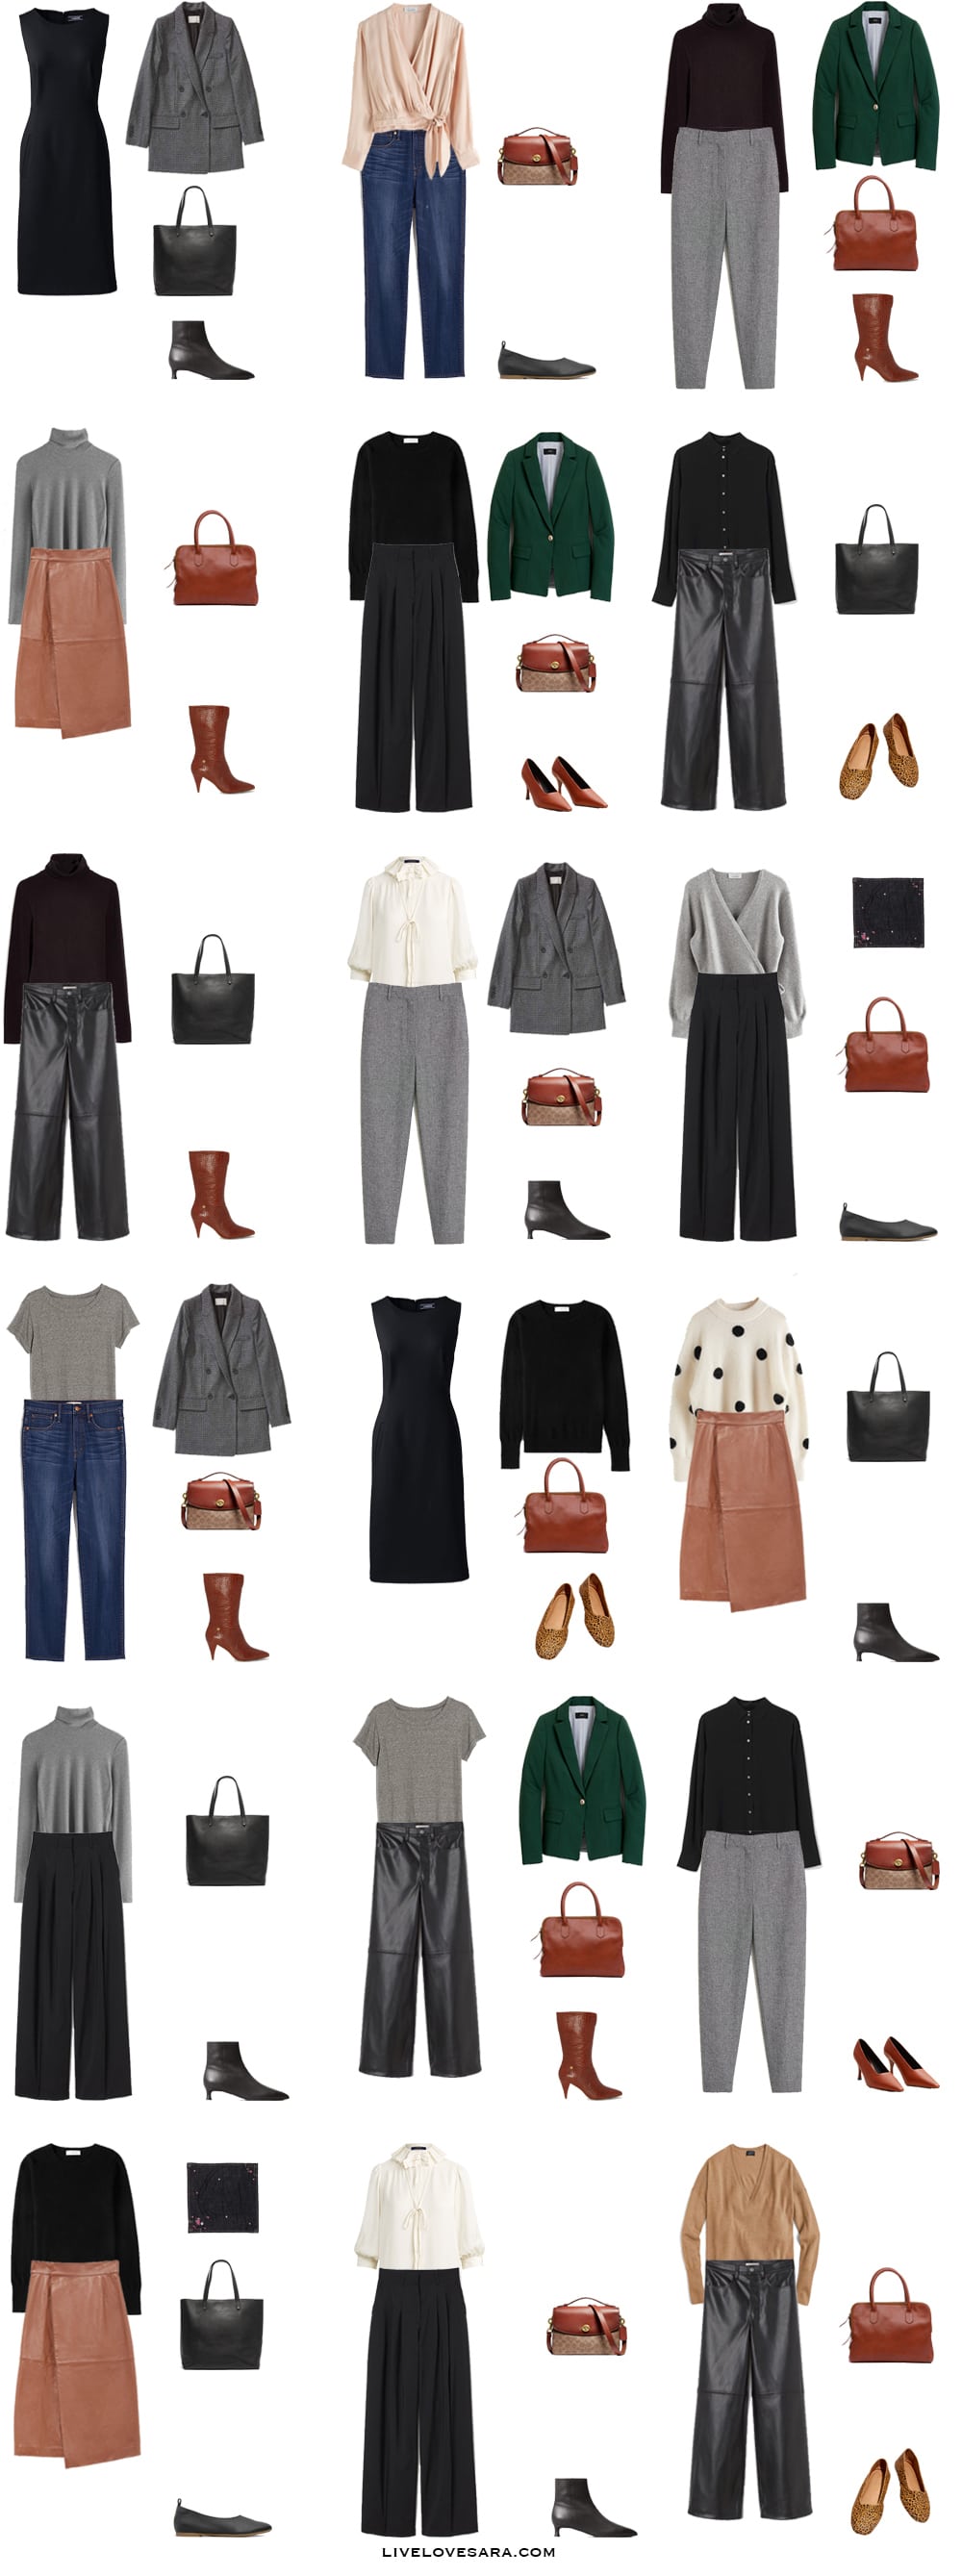 A winter work Capsule Wardrobe Work Outfit Ideas 19-36 | winter Wardrobe | winter Capsule Wardrobe | Fall Capsule wardrobe | Winter work wardrobe | All Season Capsule Wardrobe | Winter Work Outfit Ideas | livelovesara